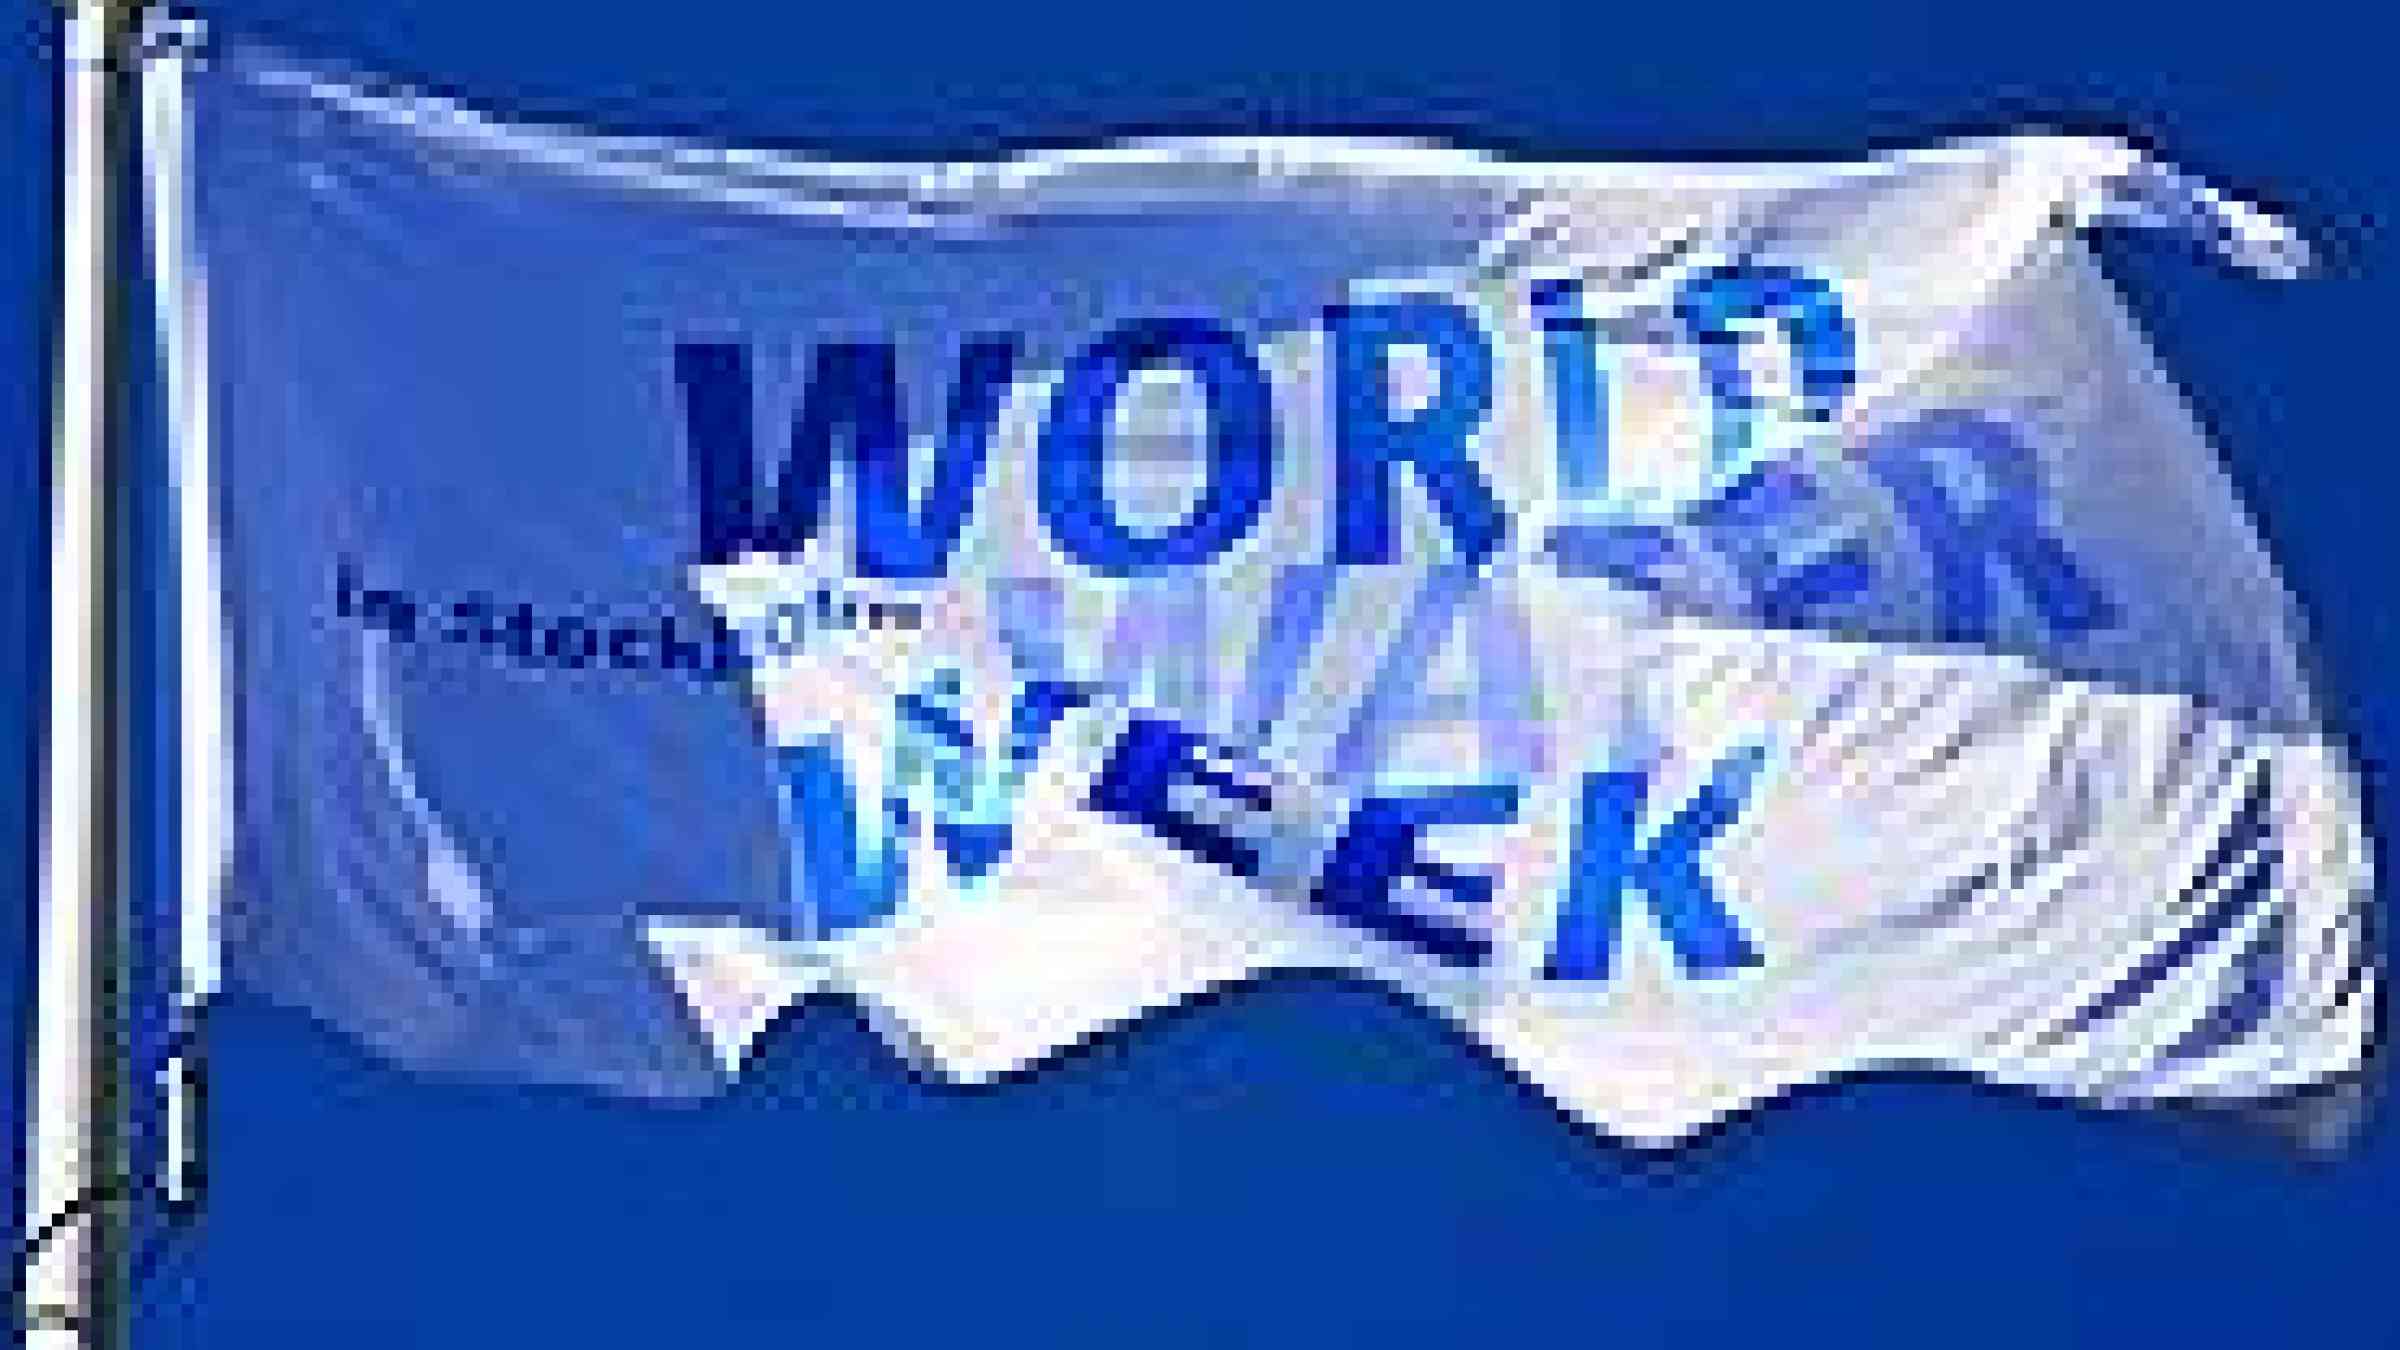 by Flickr user worldwaterweek, Creative Commons BY 2.0, http://www.flickr.com/photos/worldwaterweek/4950890133/